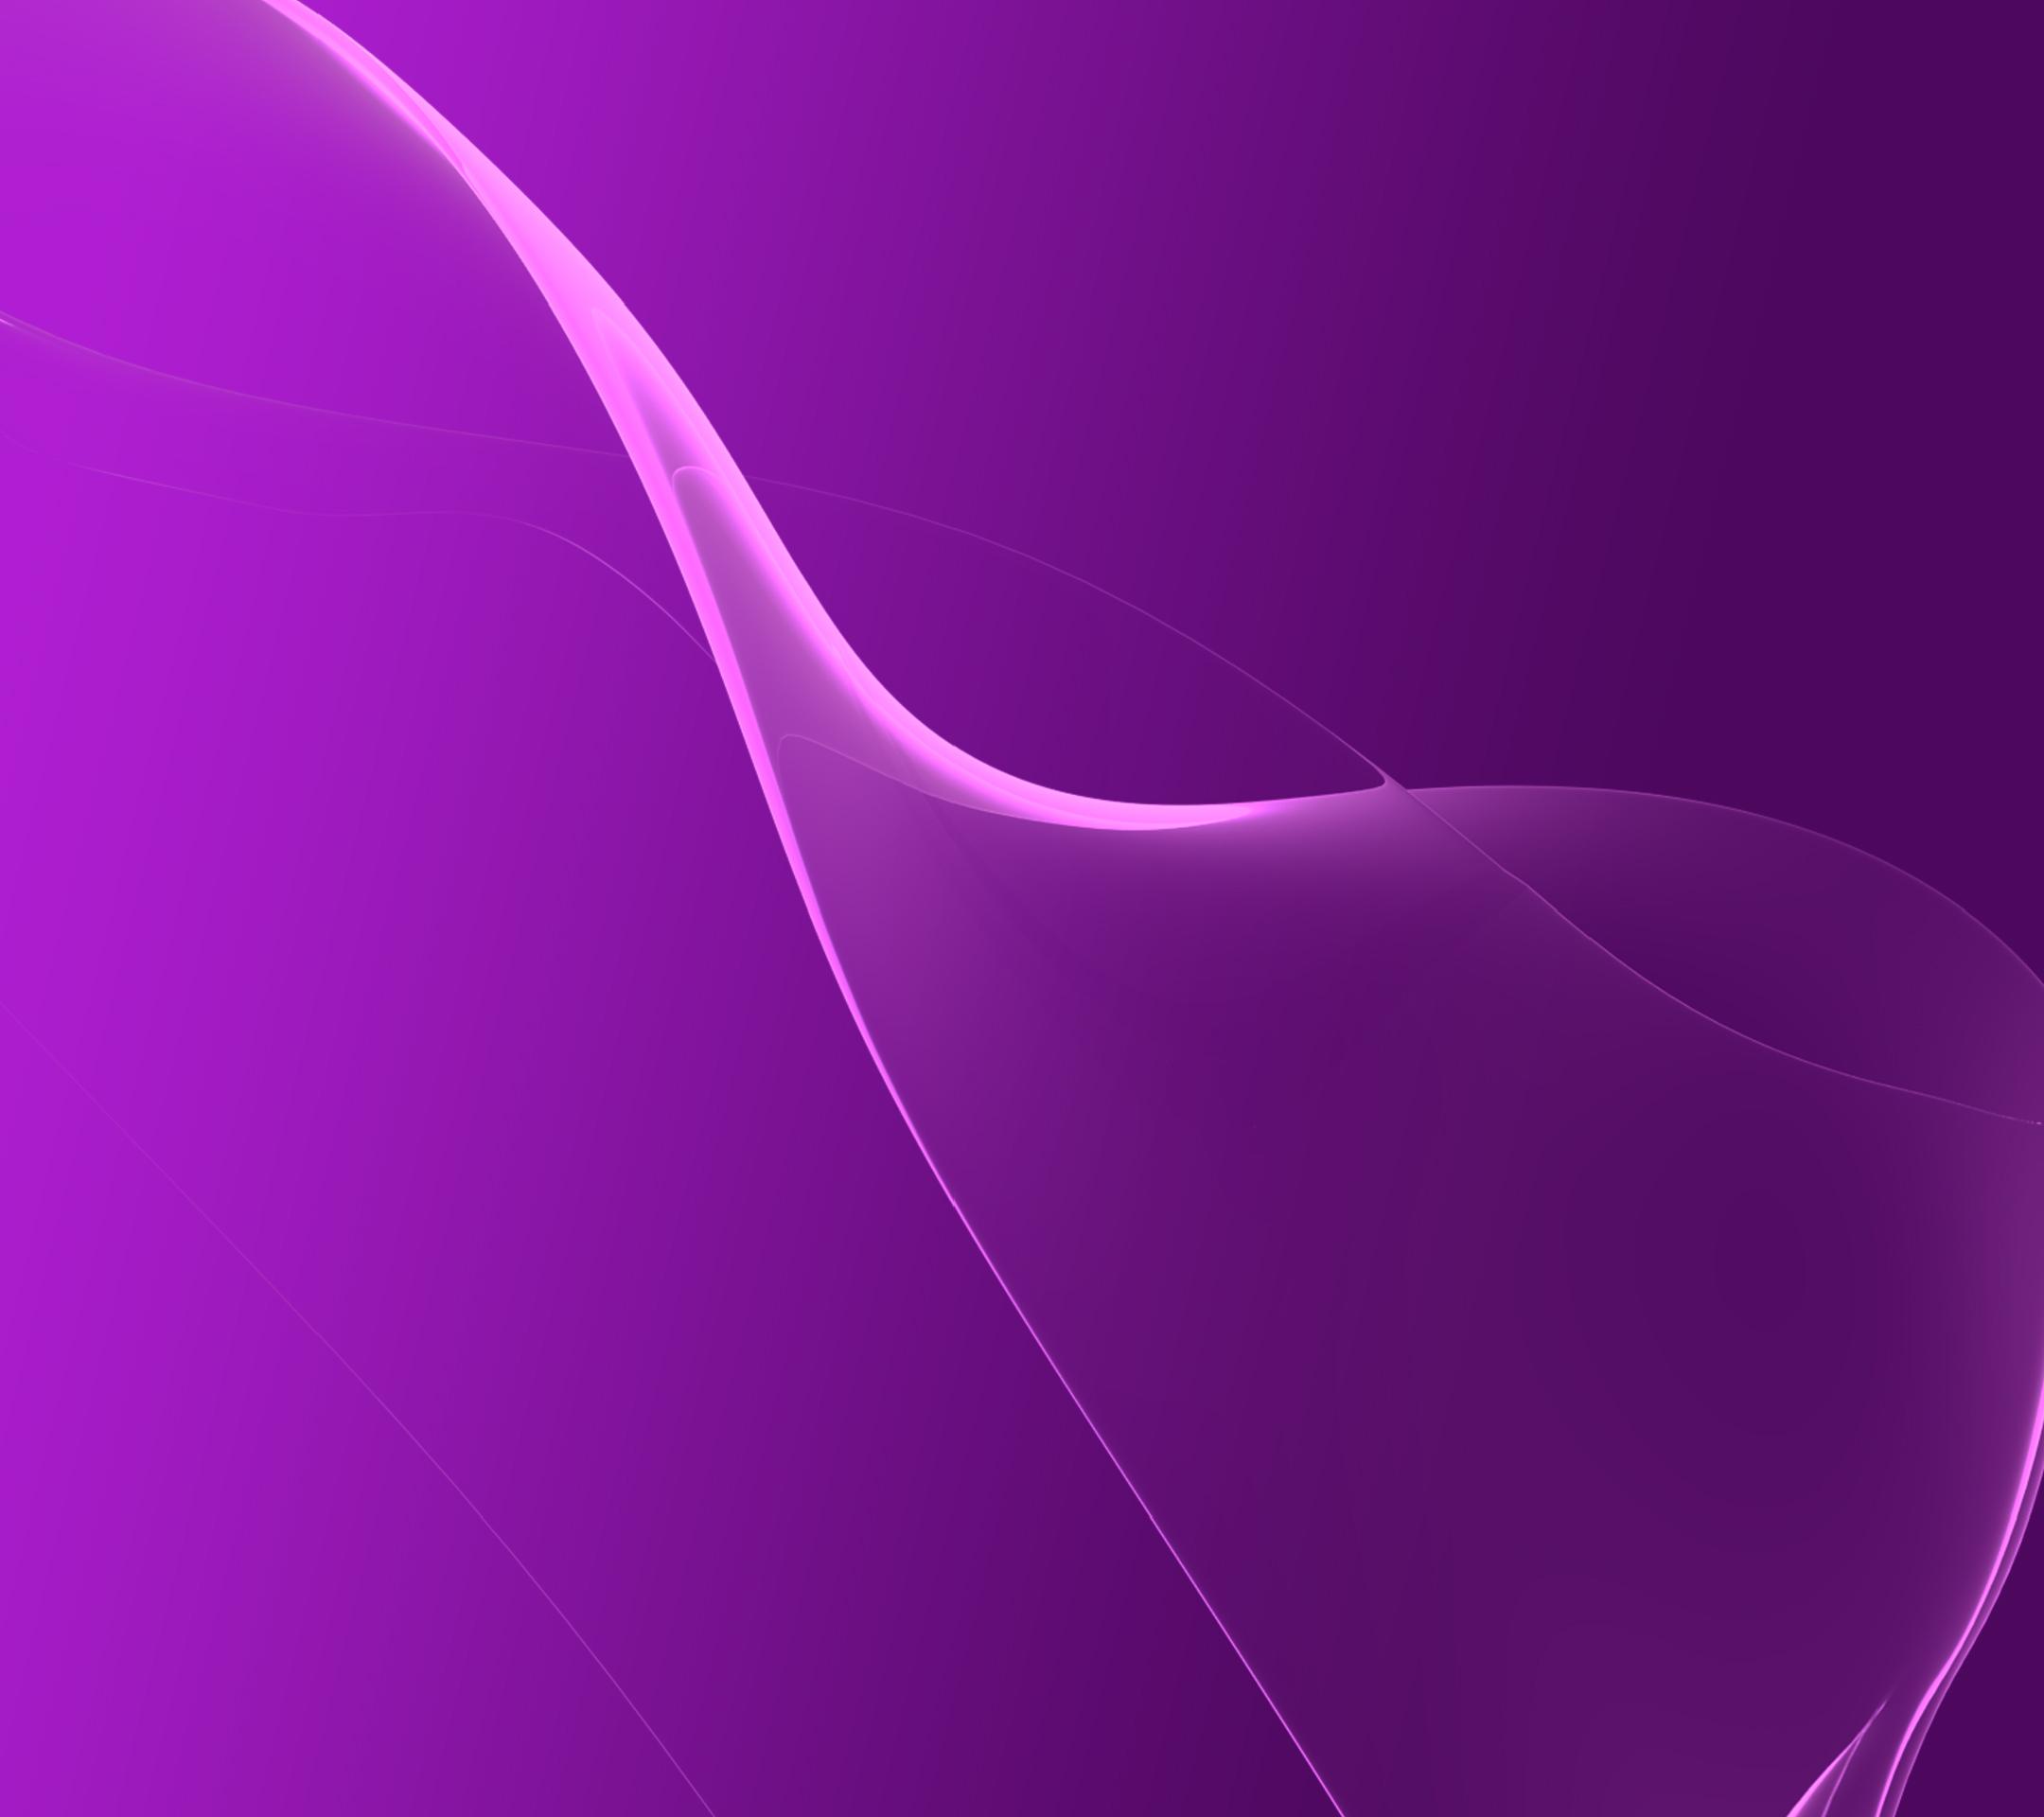 Sony Xperia Z1 wallpaper now available to download